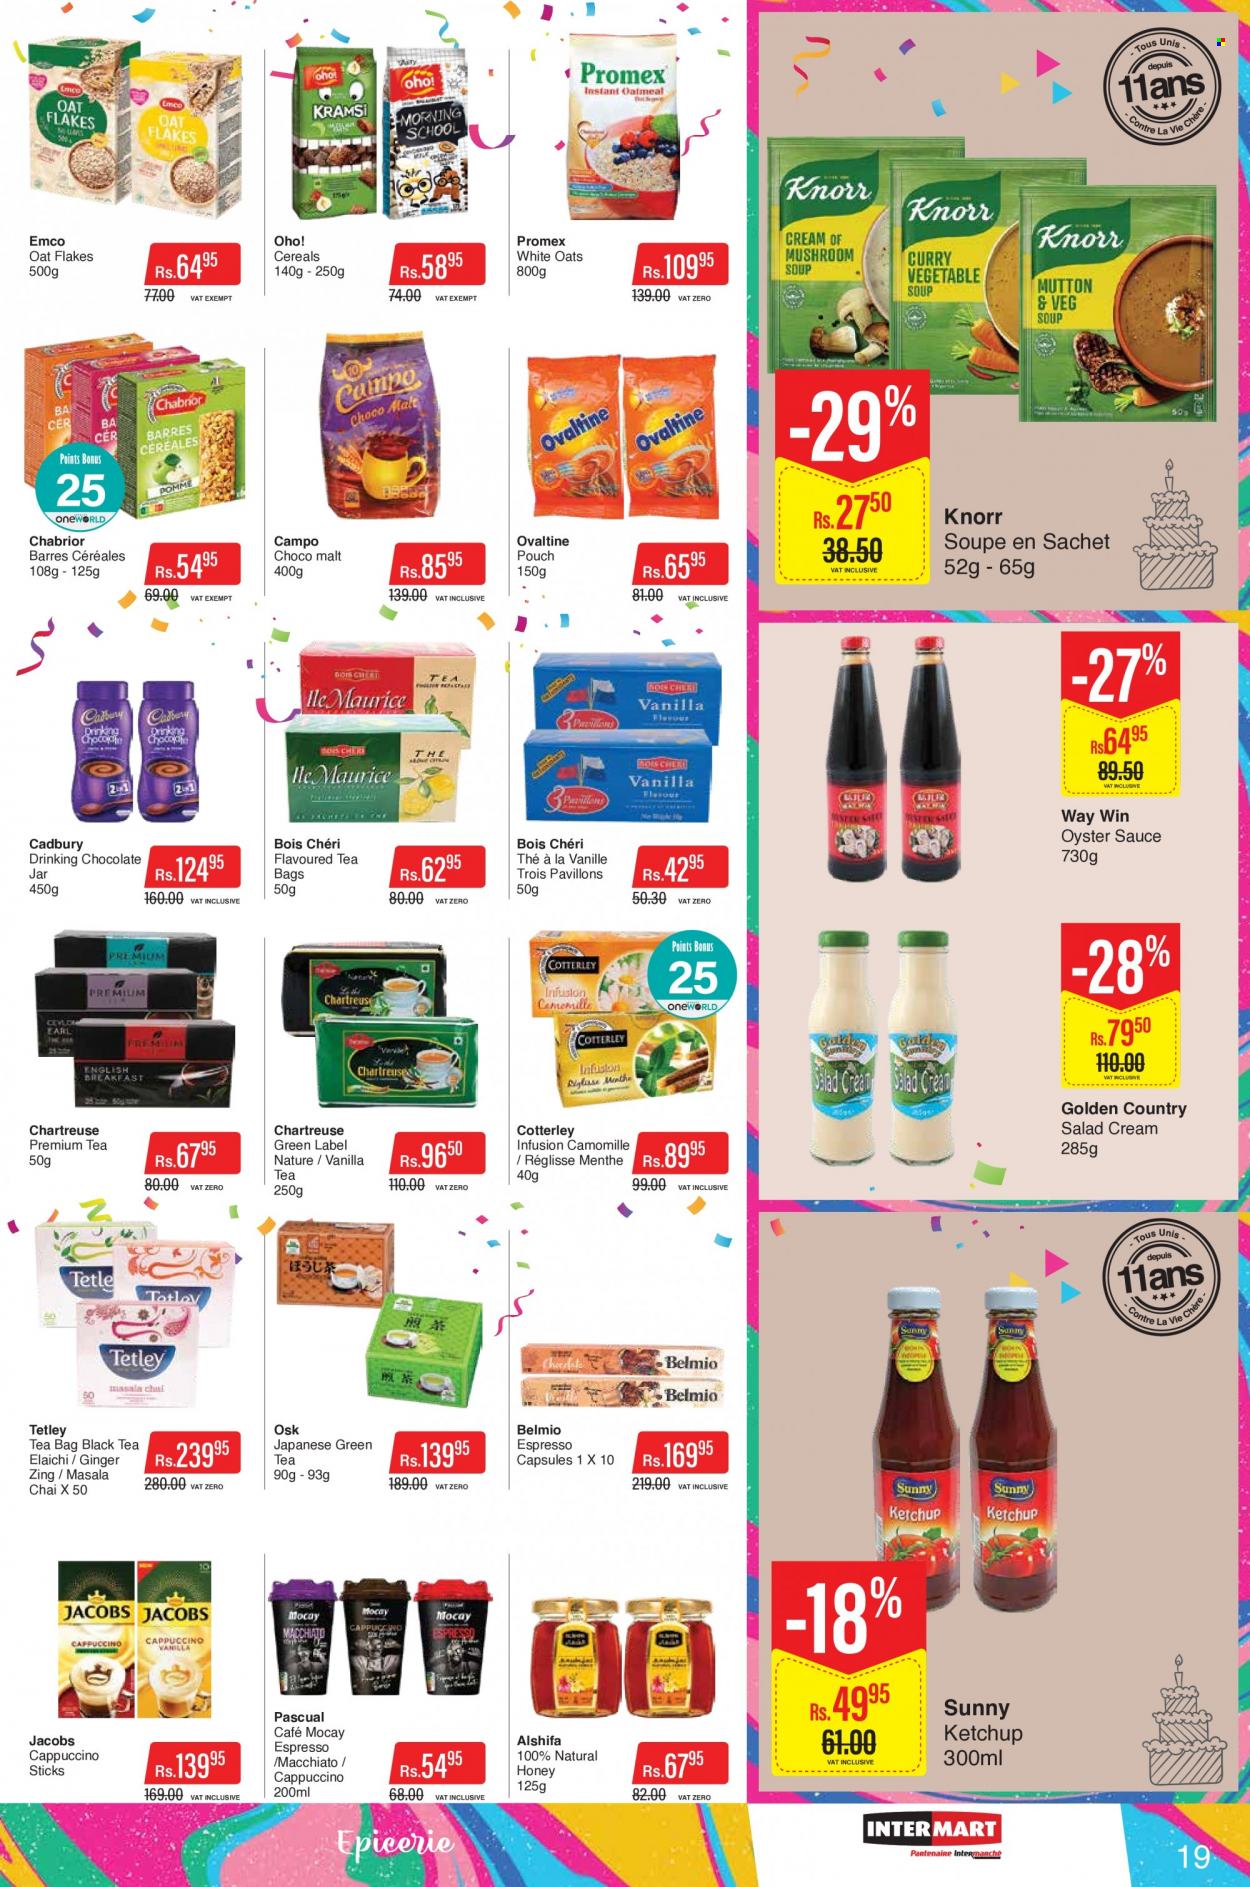 thumbnail - Intermart Catalogue - 23.09.2022 - 19.10.2022 - Sales products - ginger, oysters, sauce, salad cream, chocolate, Cadbury, oats, malt, cereals, oyster sauce, honey, hot chocolate, green tea, tea bags, cappuccino, Jacobs, jar, ketchup, Knorr. Page 19.